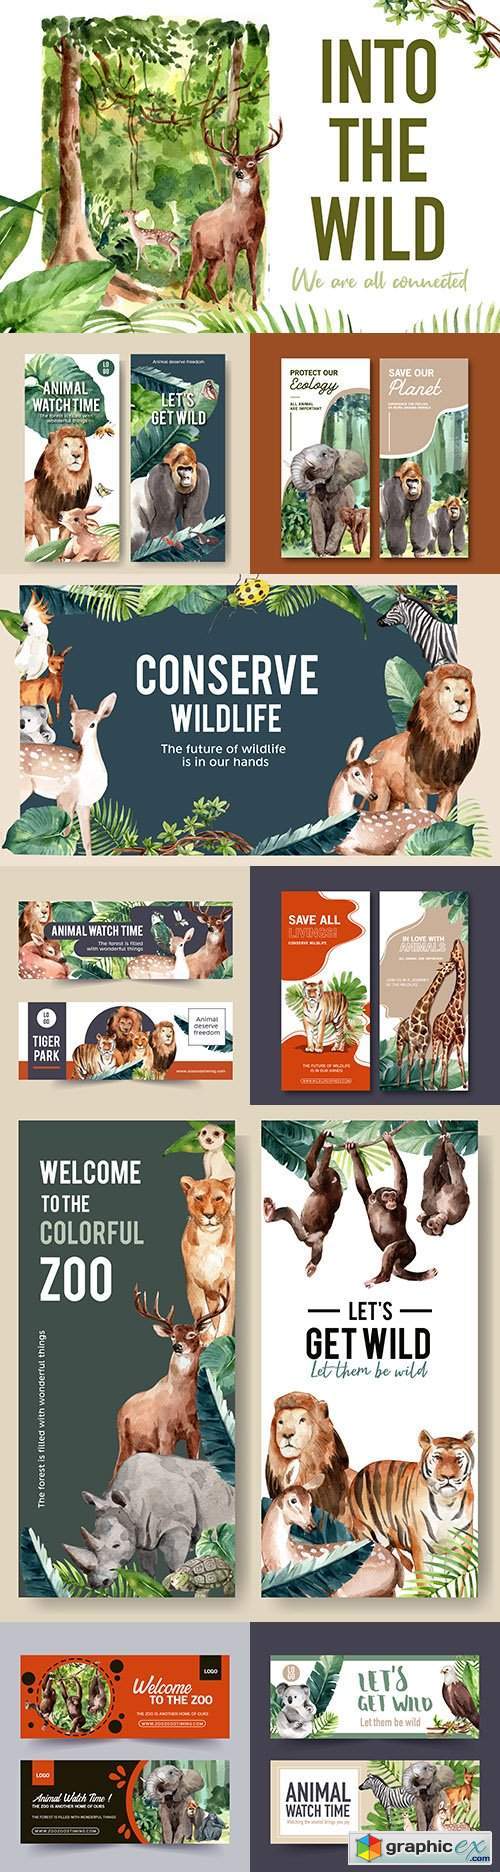 Zoo banner design with animal watercolor illustrations